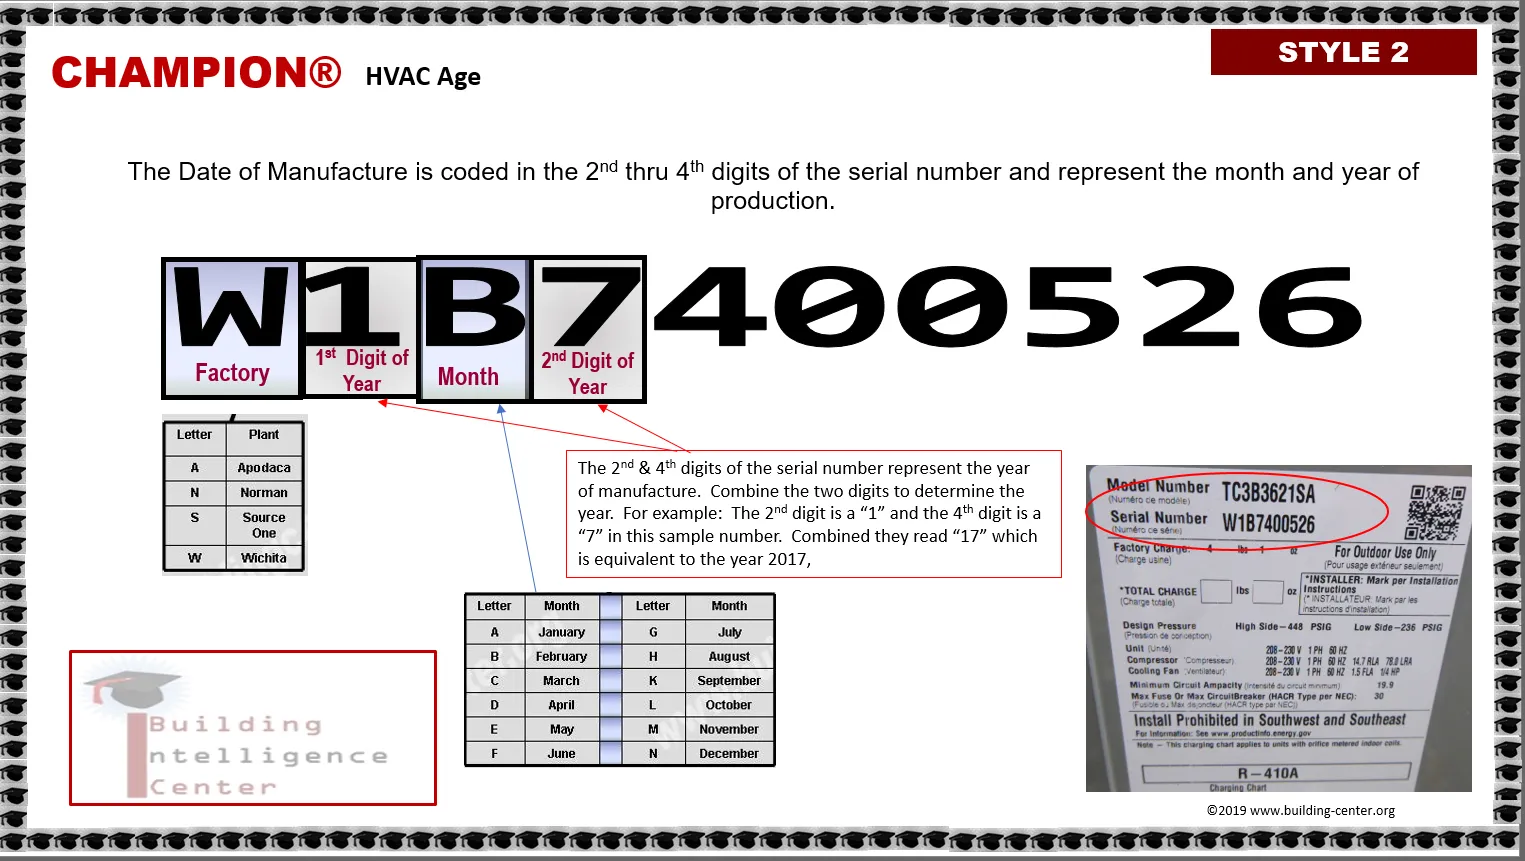 How to determine the date of manufacture or age of Champion Brand HVAC equipment.